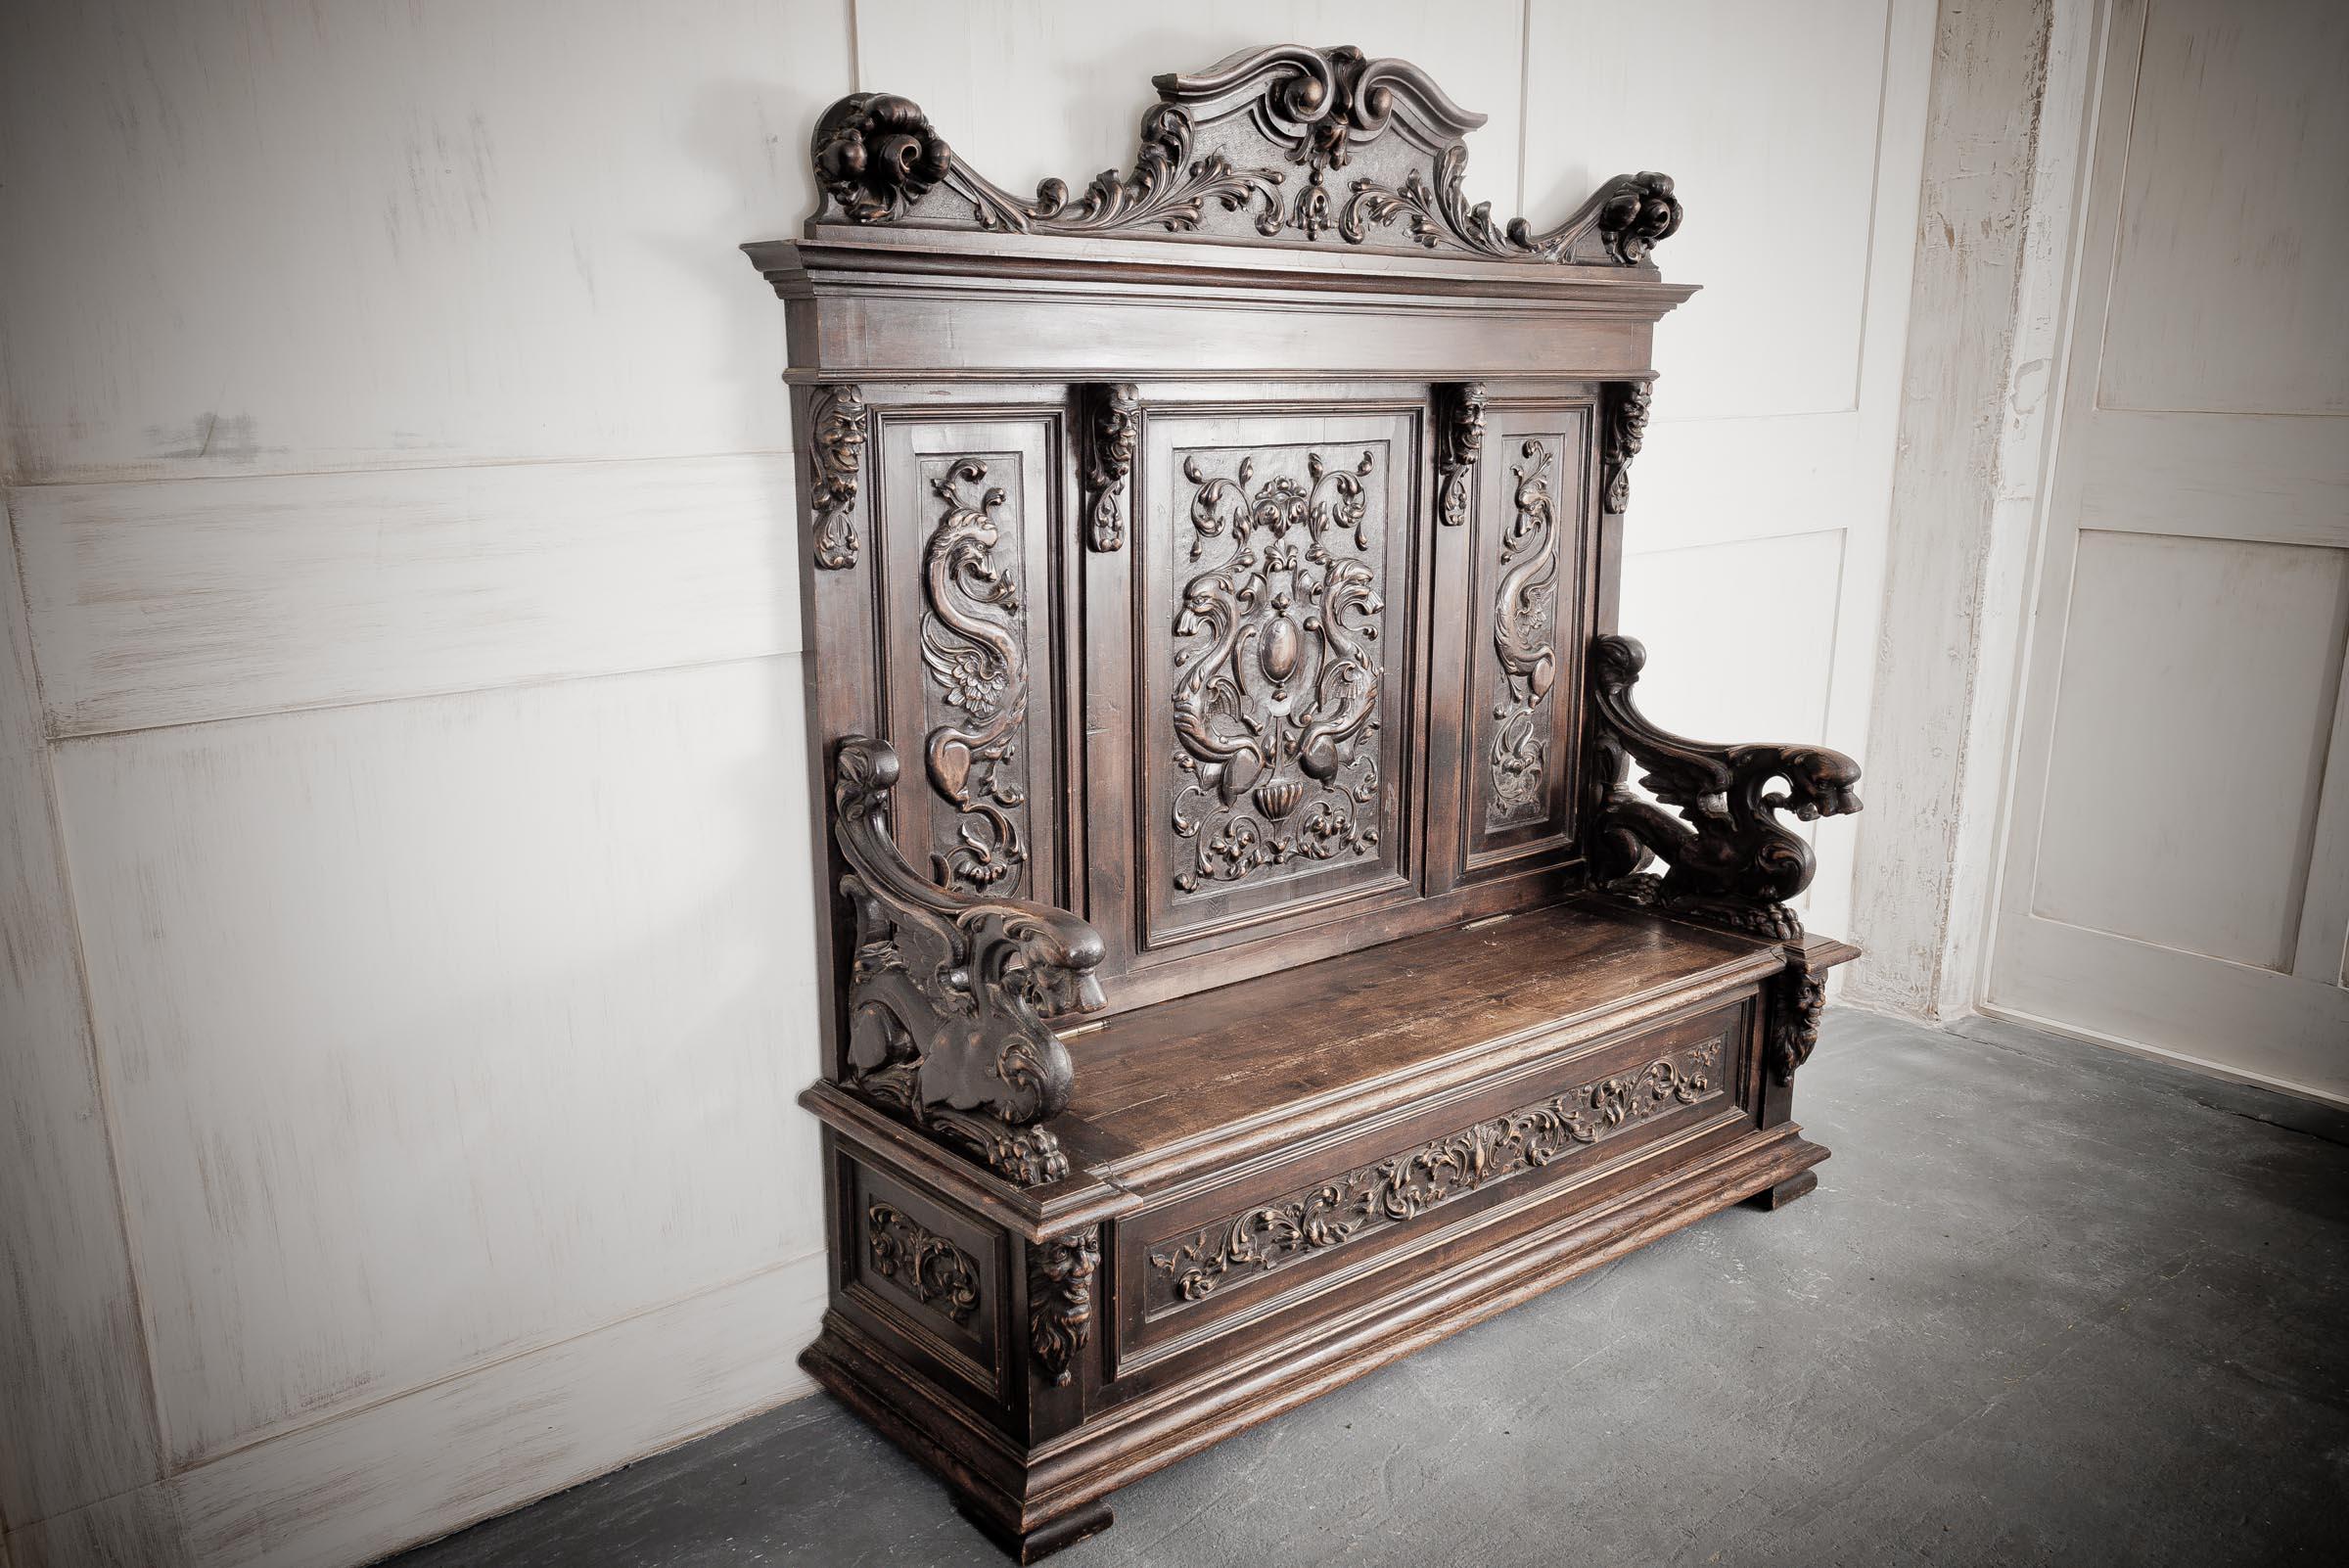 Carved Louis XVIII French Chateau settle dating from early 19th century. Also referred to as a monks bench this fine example carries a wonderfully aged and worn look in all the right places with a delightful patina showing the age and history